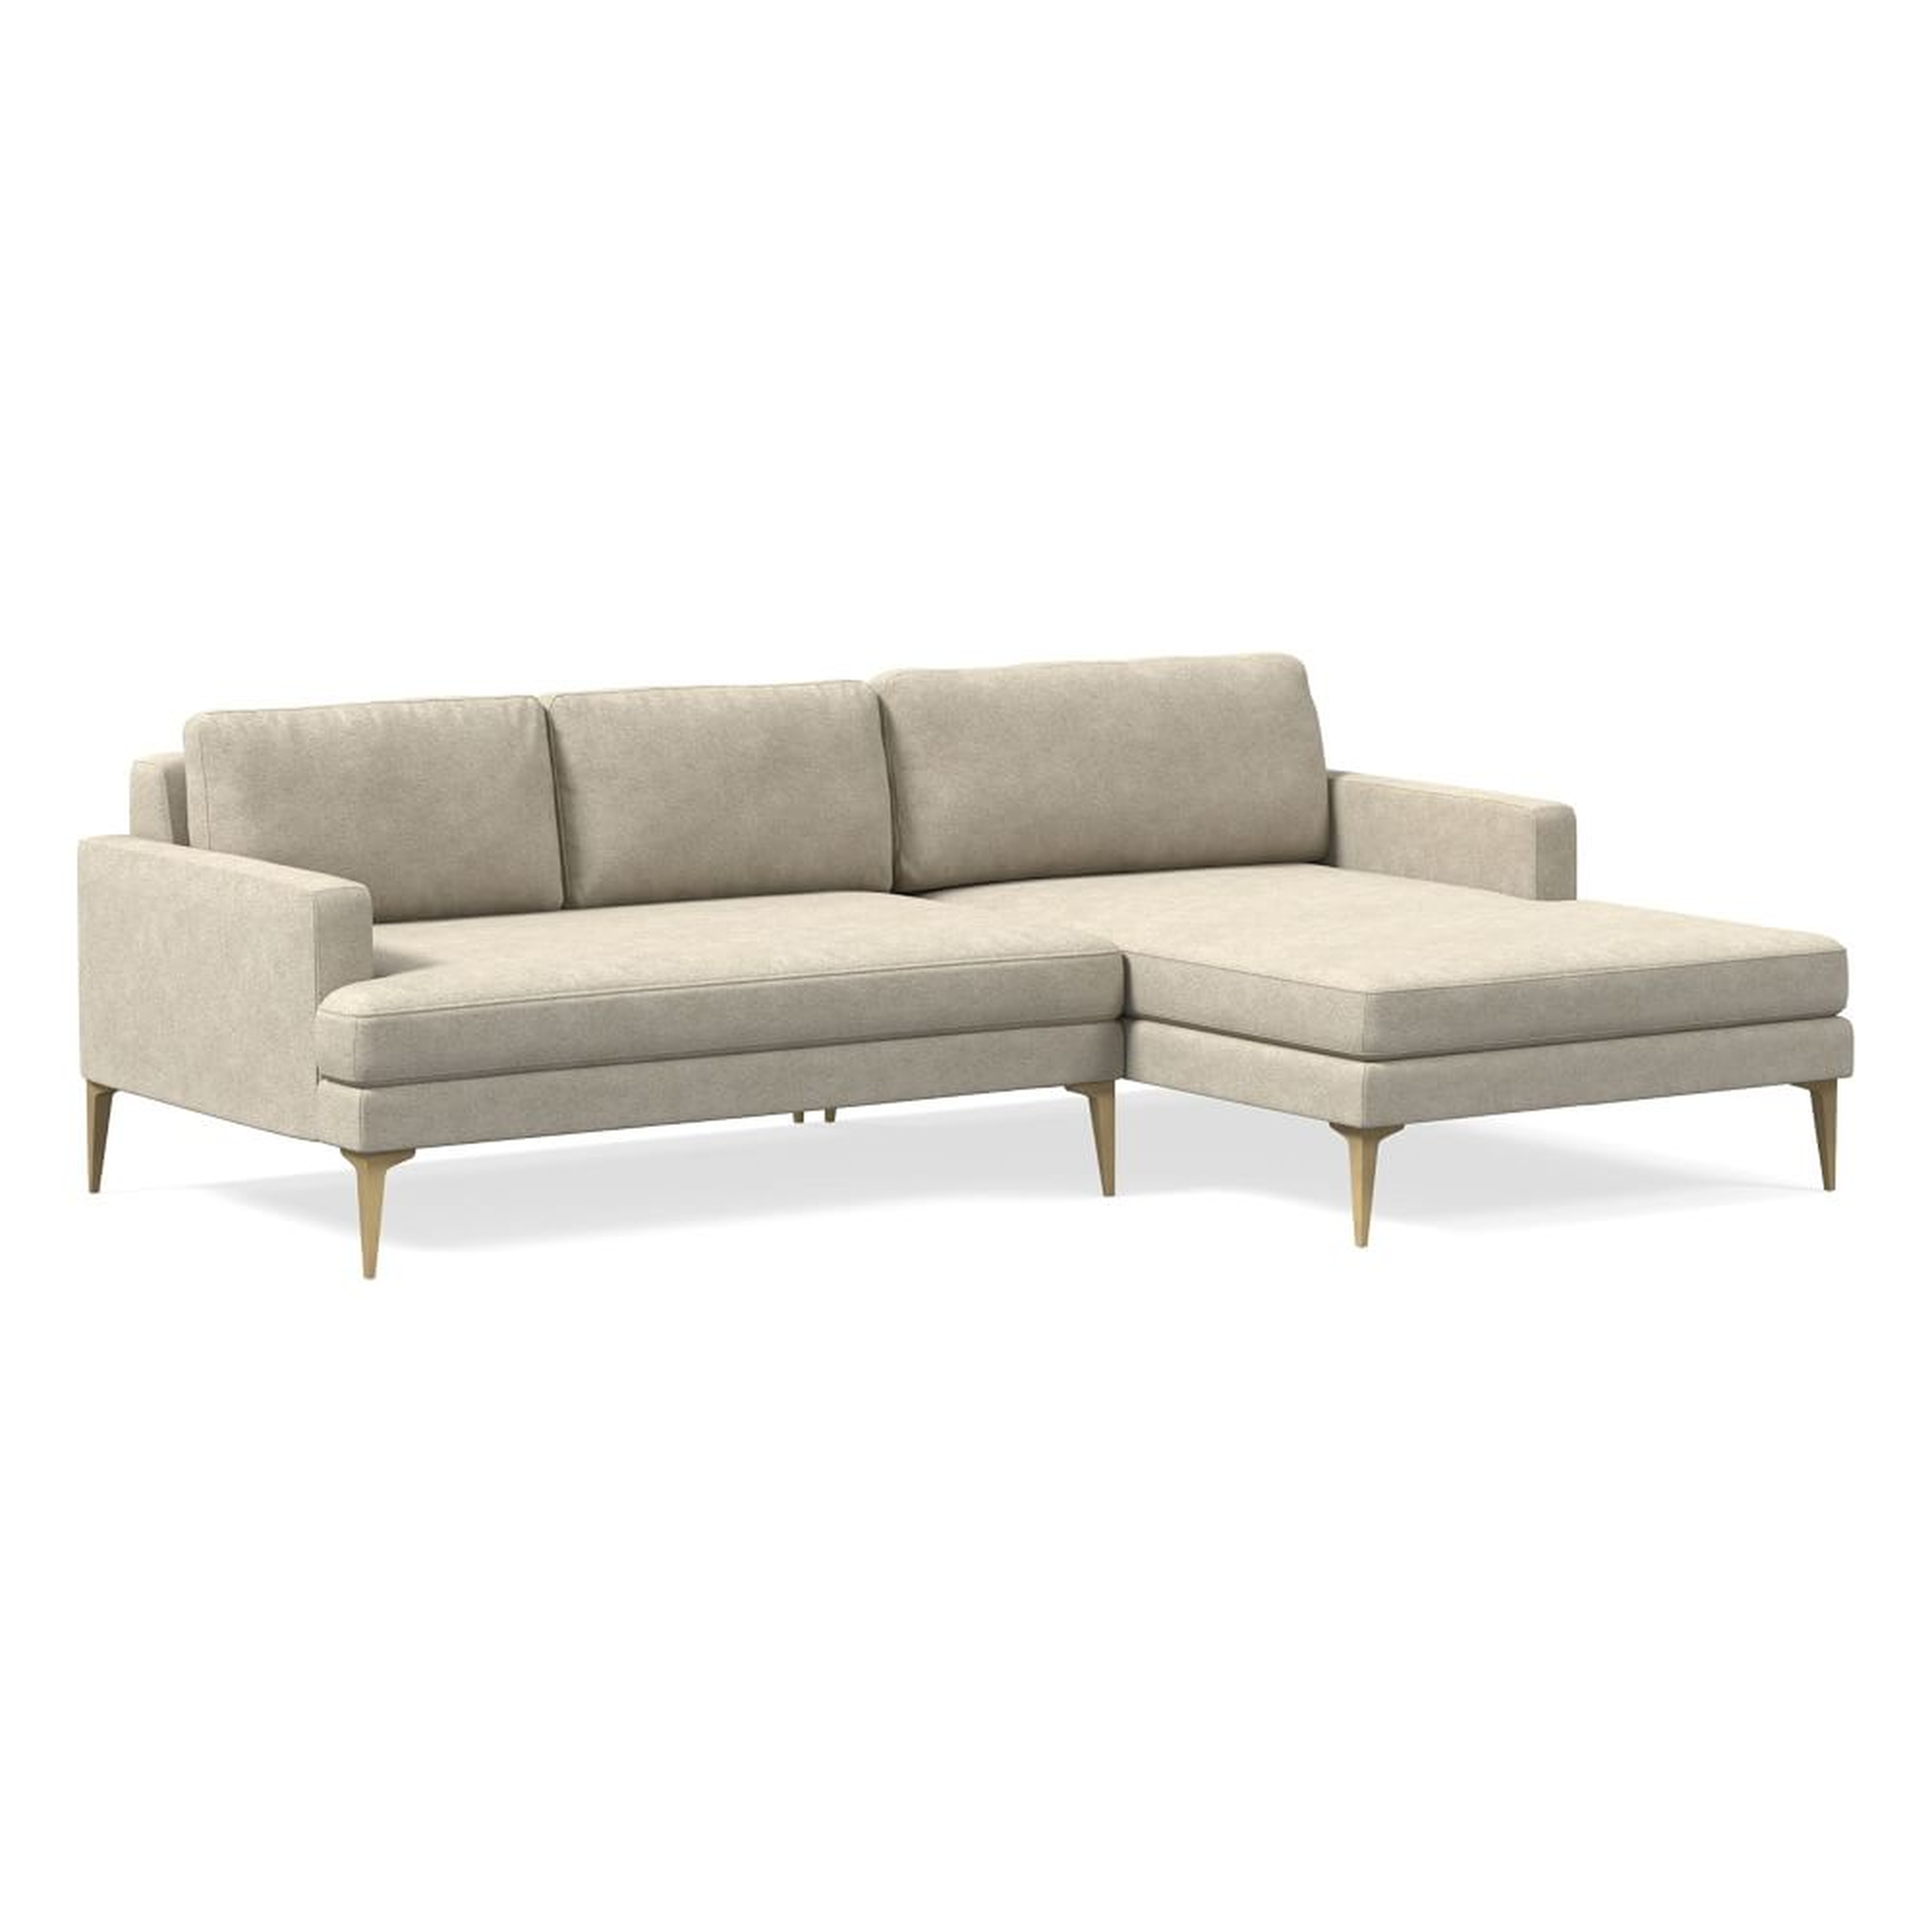 Andes 90" Right Multi Seat 2-Piece Chaise Sectional, Standard Depth, Distressed Velvet, Dune, BB - West Elm